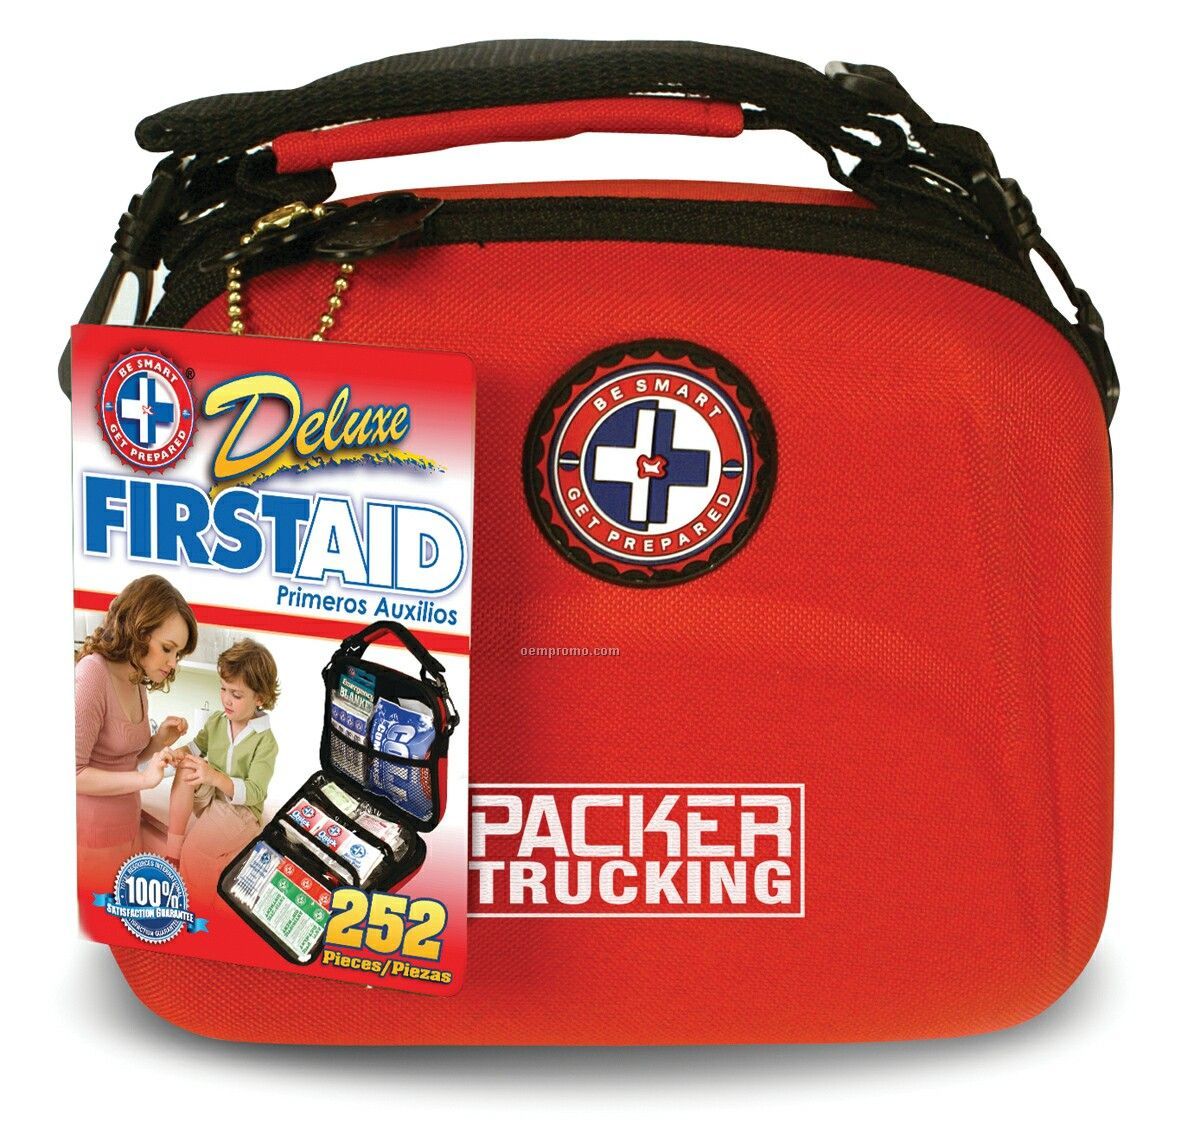 242-piece Outdoor First Aid / Emergency Kit